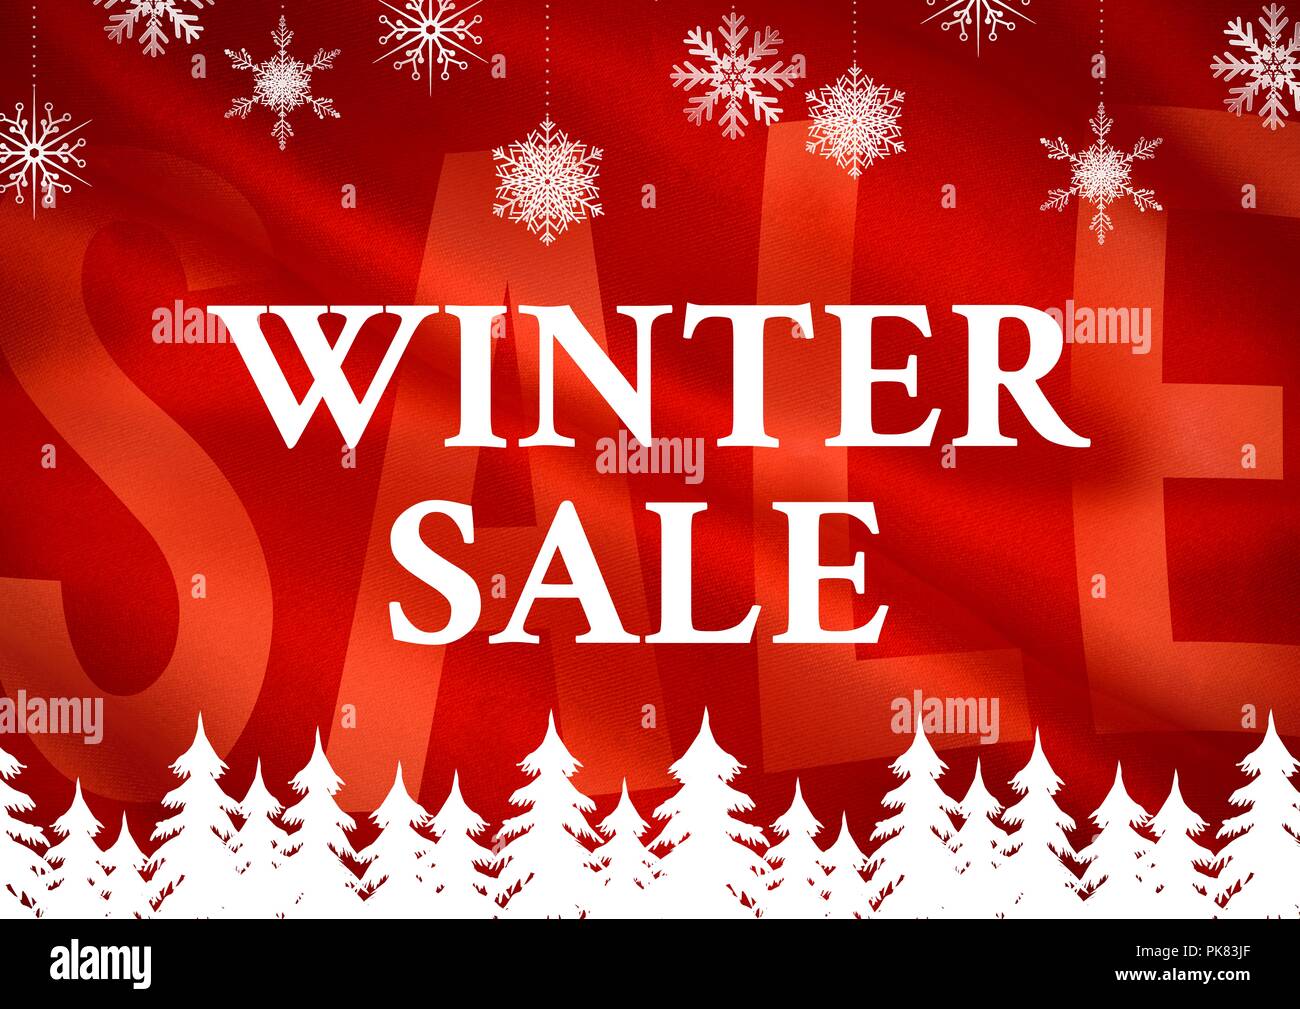 Winter Sale with red Sale in background besides textblock and white firs  and snowflakes Stock Photo - Alamy